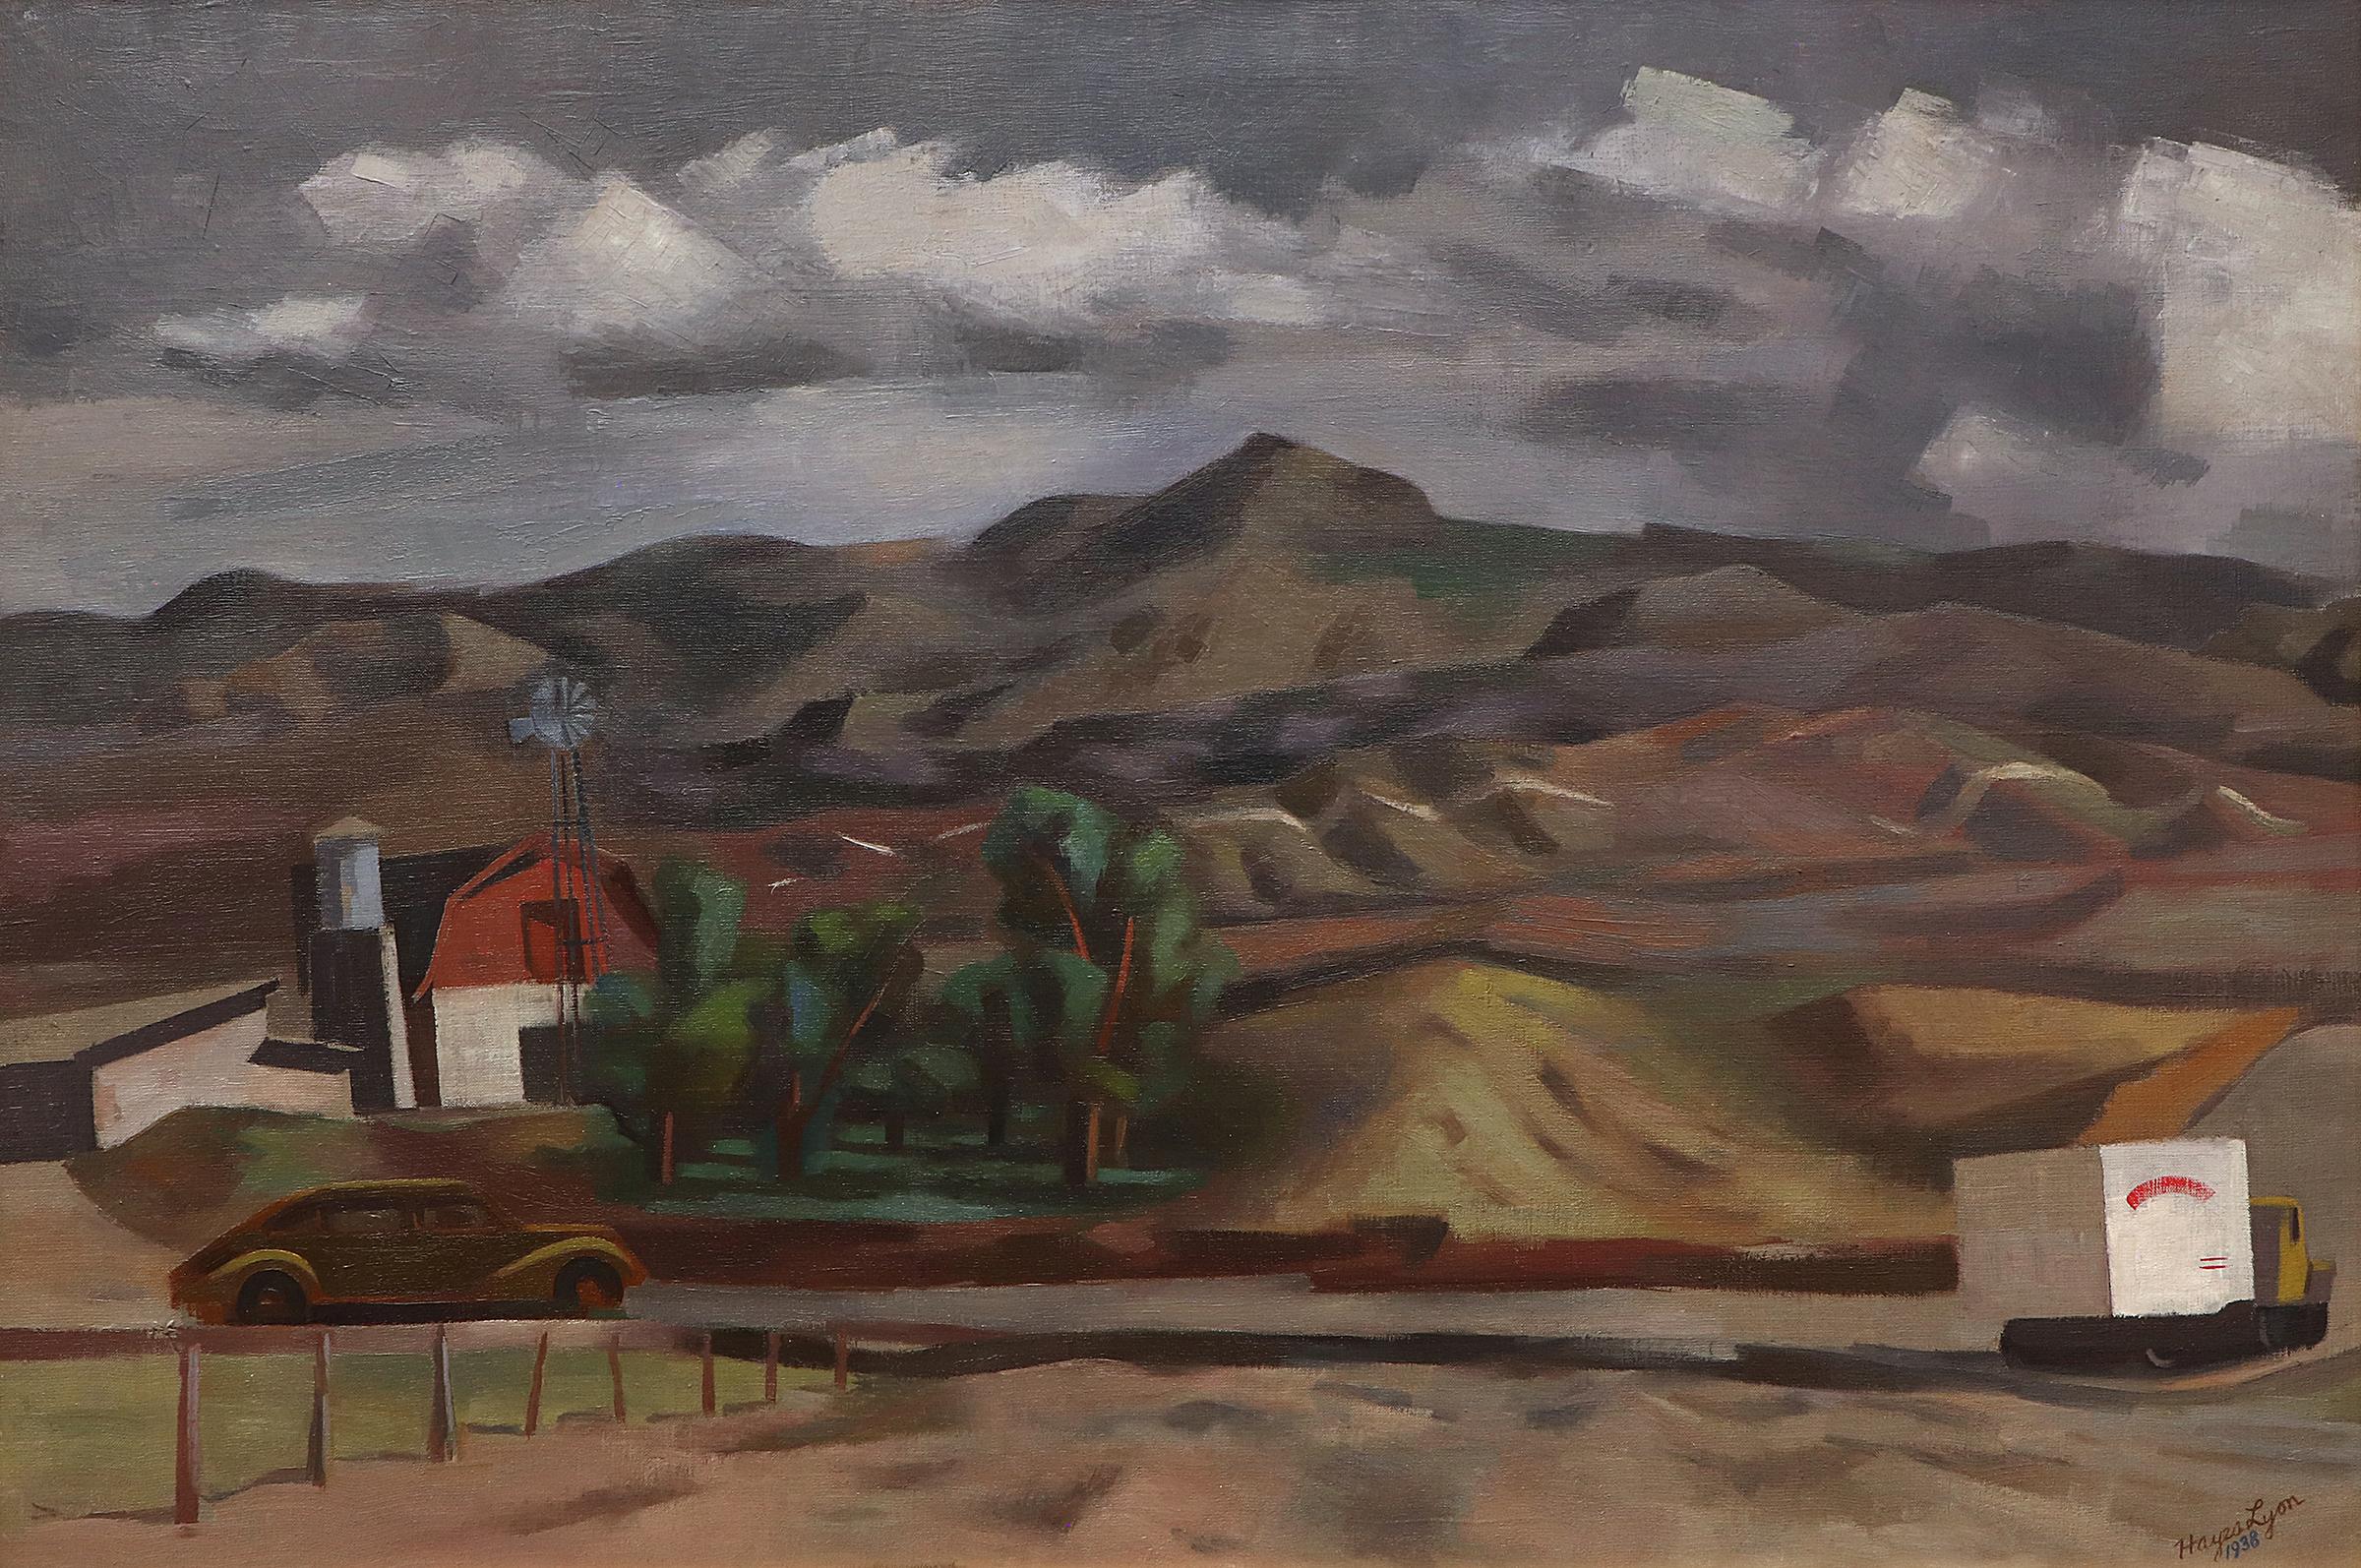 WPA era oil on canvas landscape painting by Hayes Lyon (1901-1987) titled 'The Hillside' from 1938. American modernist portrayal of a hillside farm with a barn and a road with two vehicles driving. Mountain peaks and clouds are in the background.